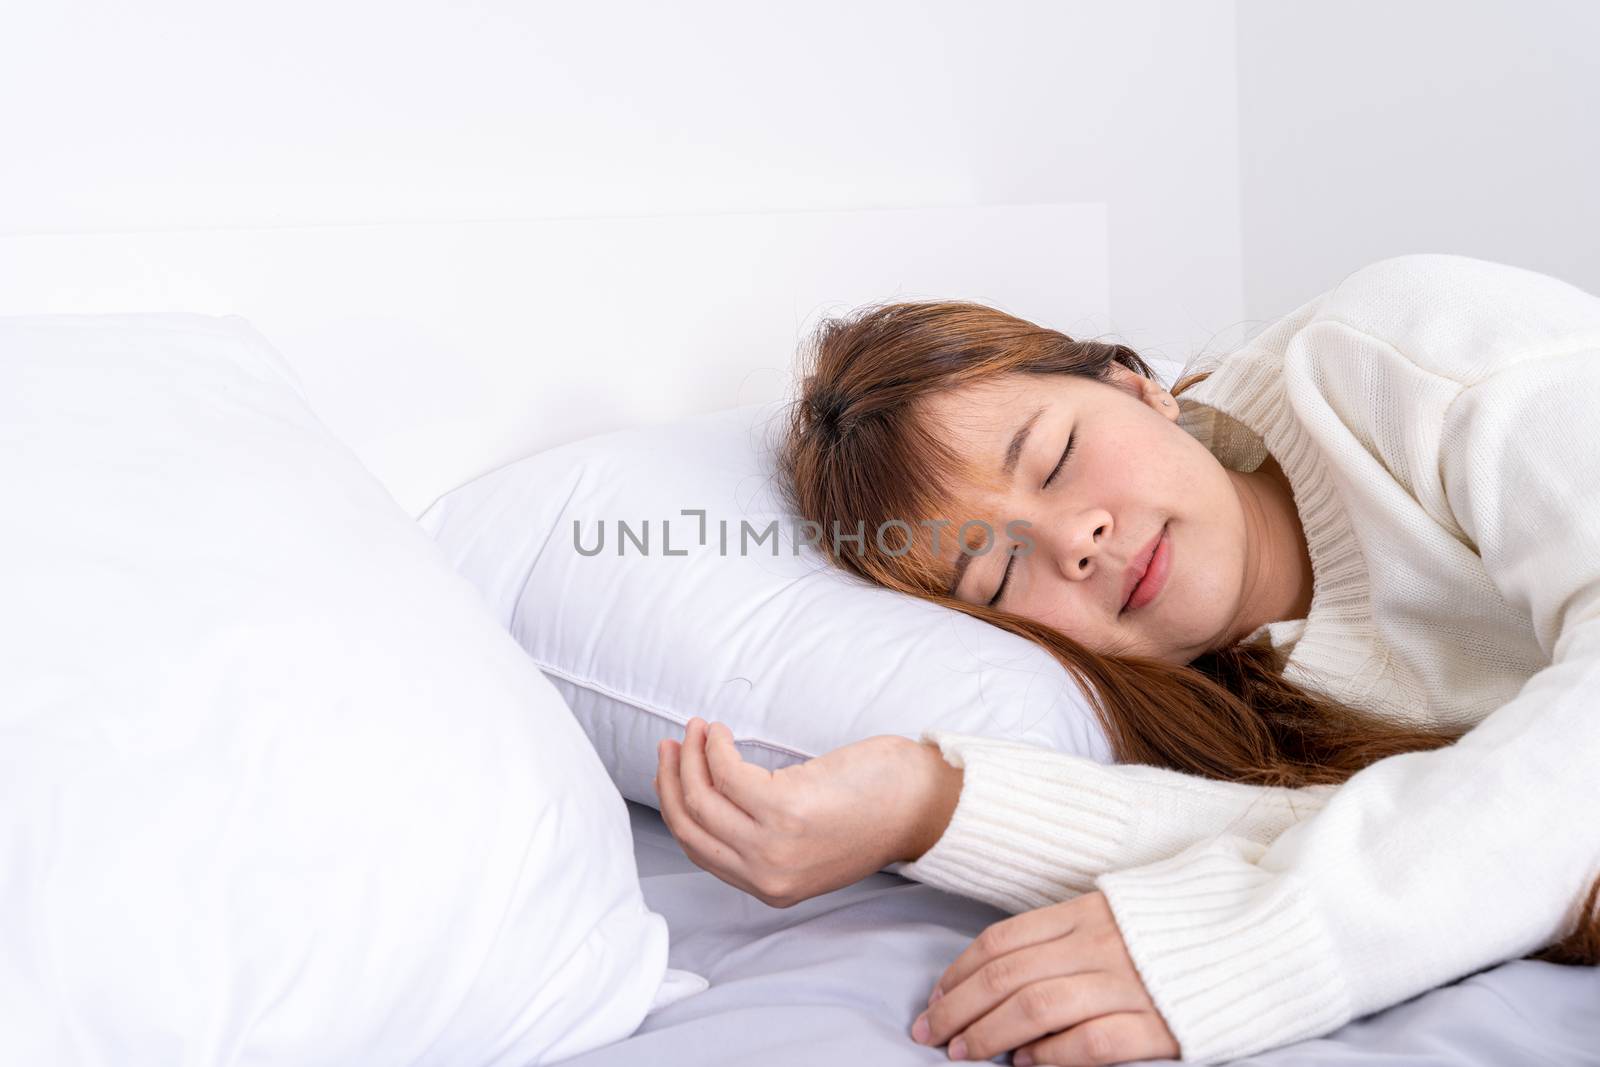 Asian woman sleeping in the bed and relaxing in a good mood happy dream. Healthcare medical or daily life concept.